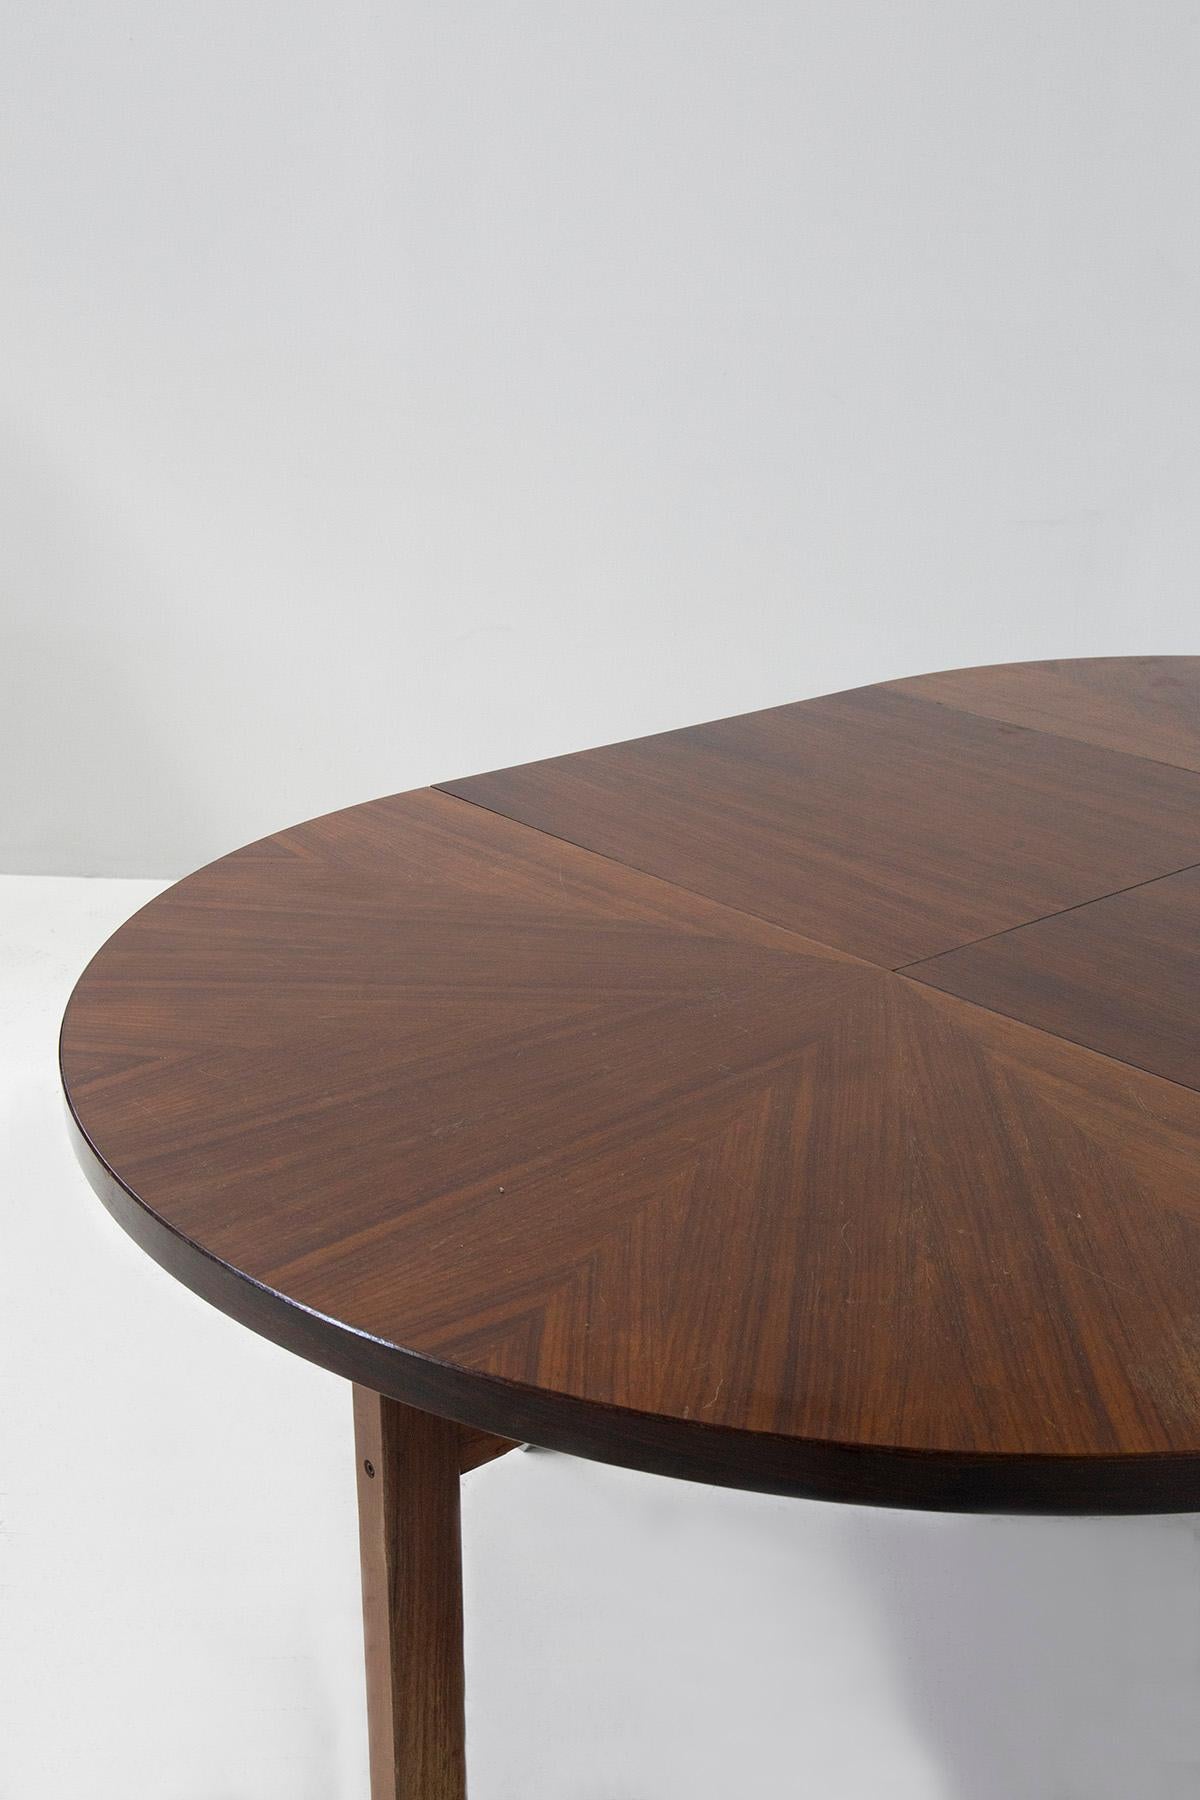 Ico Parisi for MIM Olbia Round Dining Table, Published For Sale 1